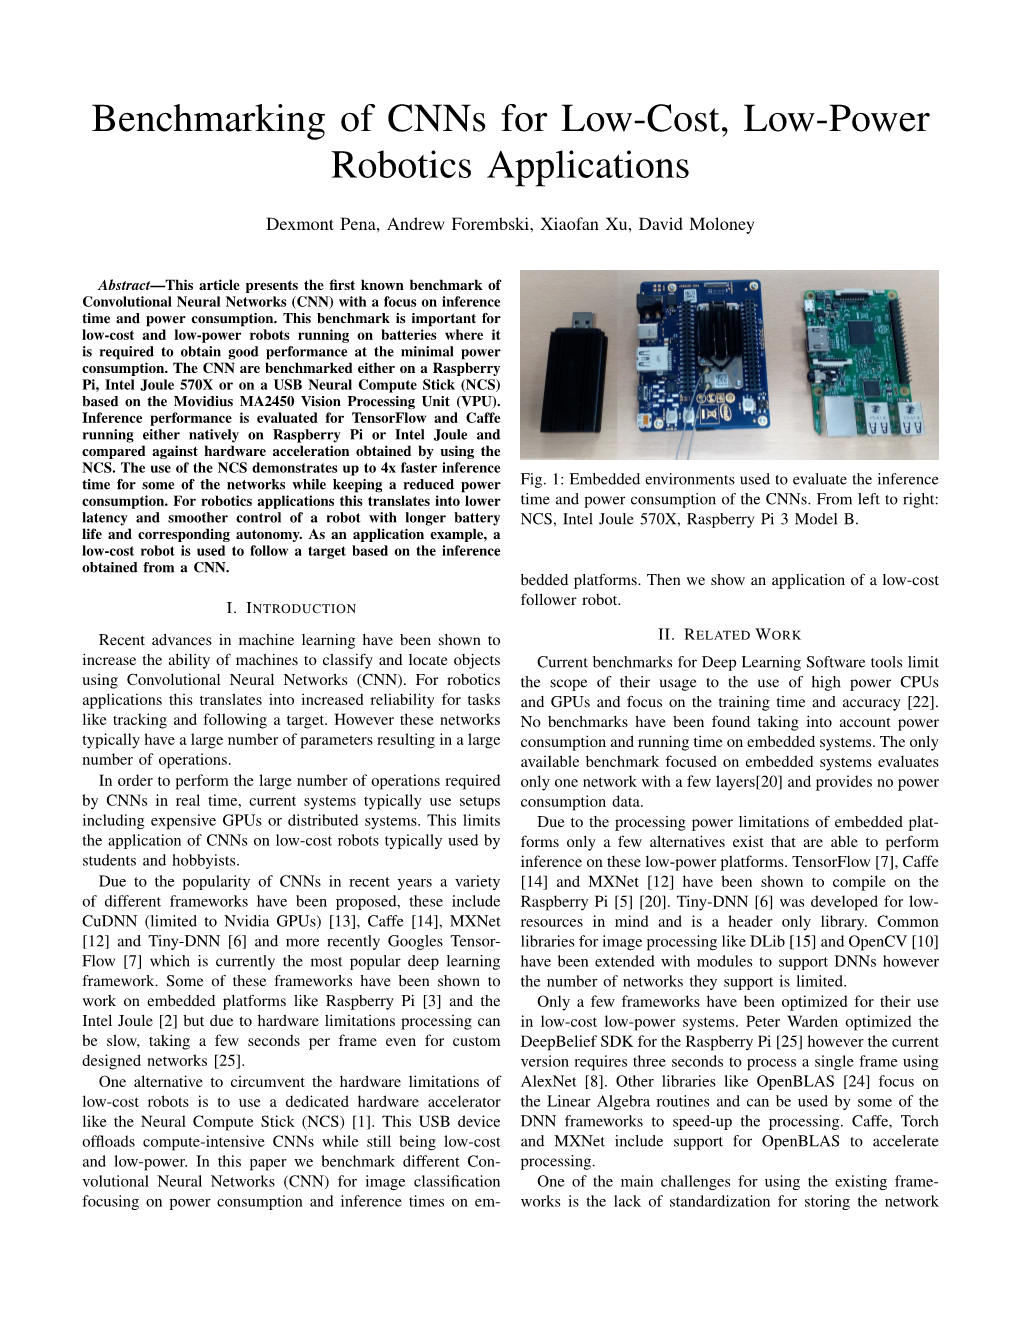 Benchmarking of Cnns for Low-Cost, Low-Power Robotics Applications